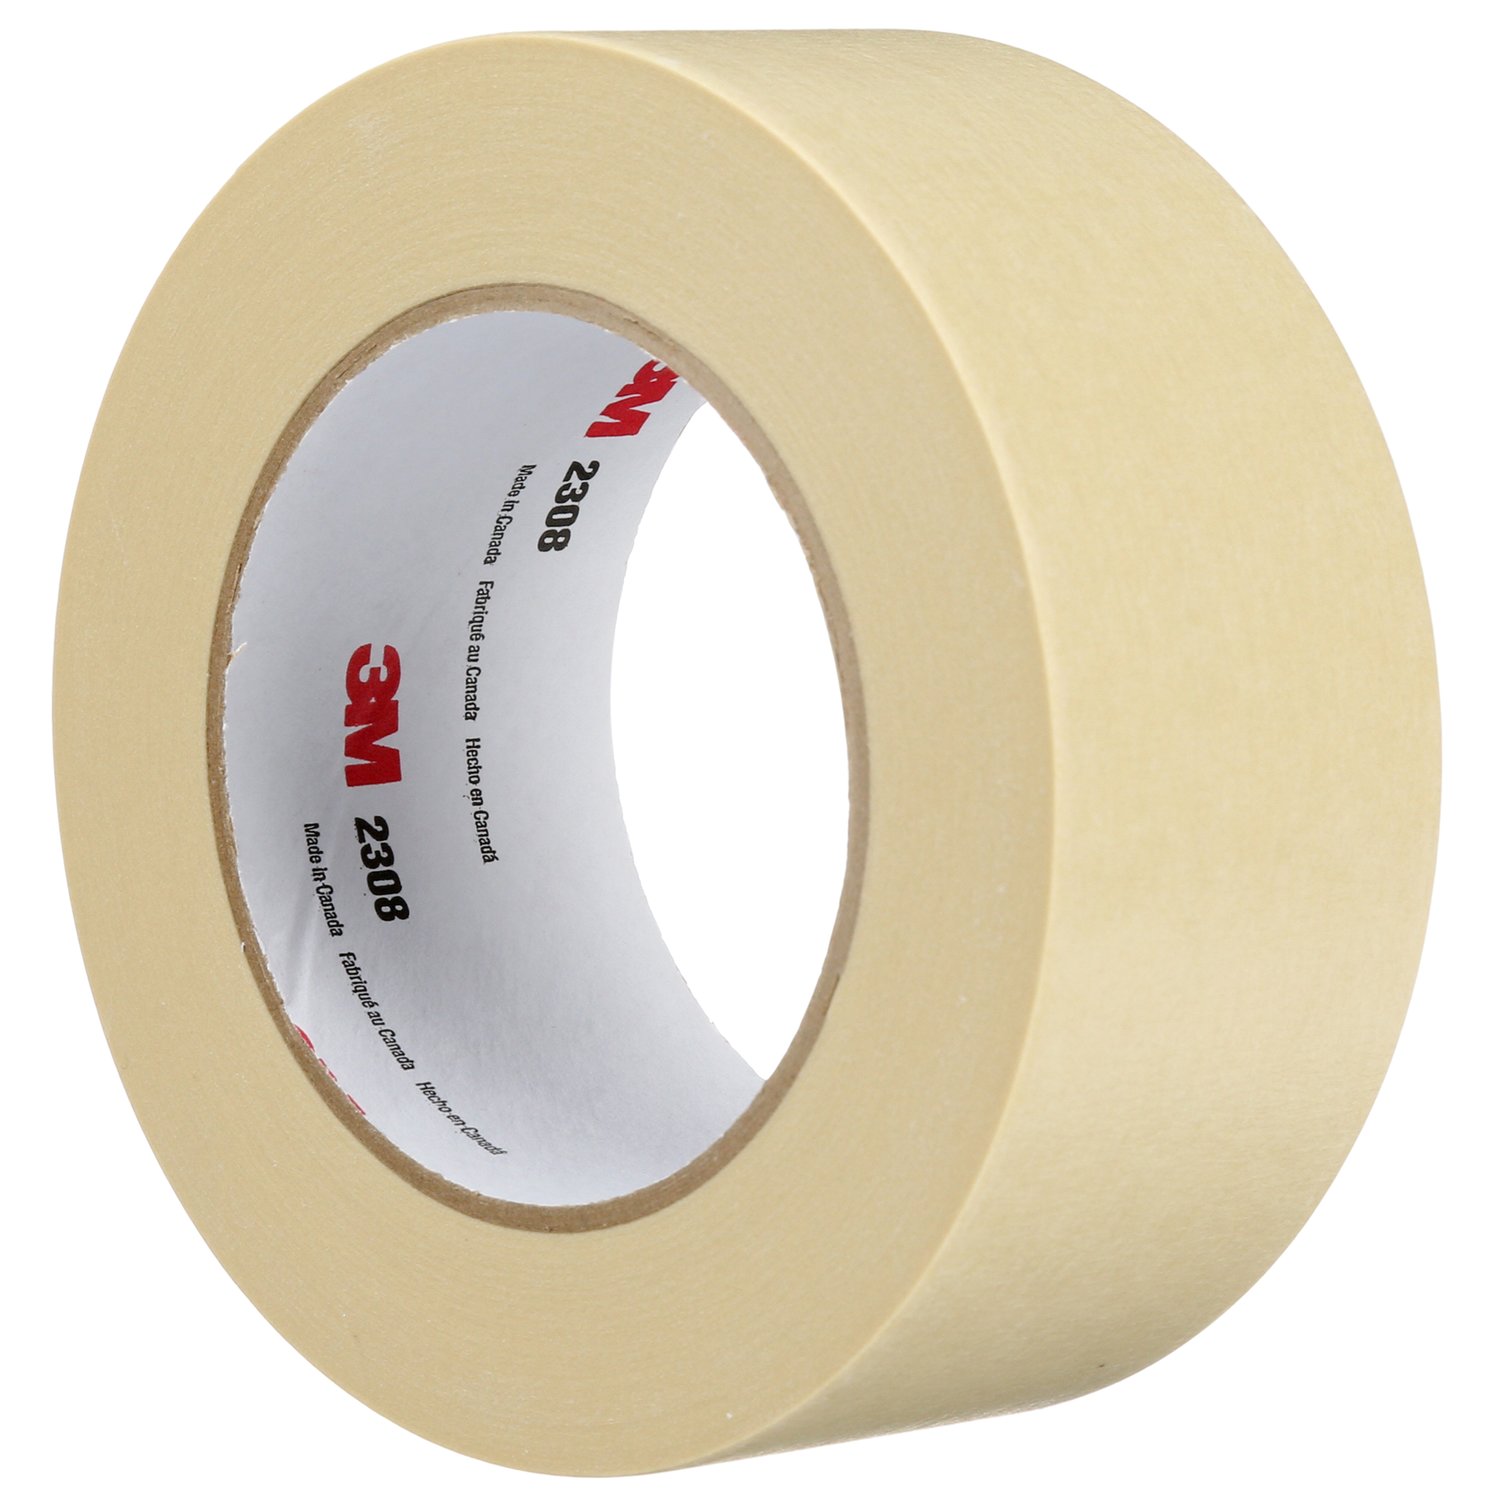 3M GPT-020P Double sided thin tape with PET reinforcement and